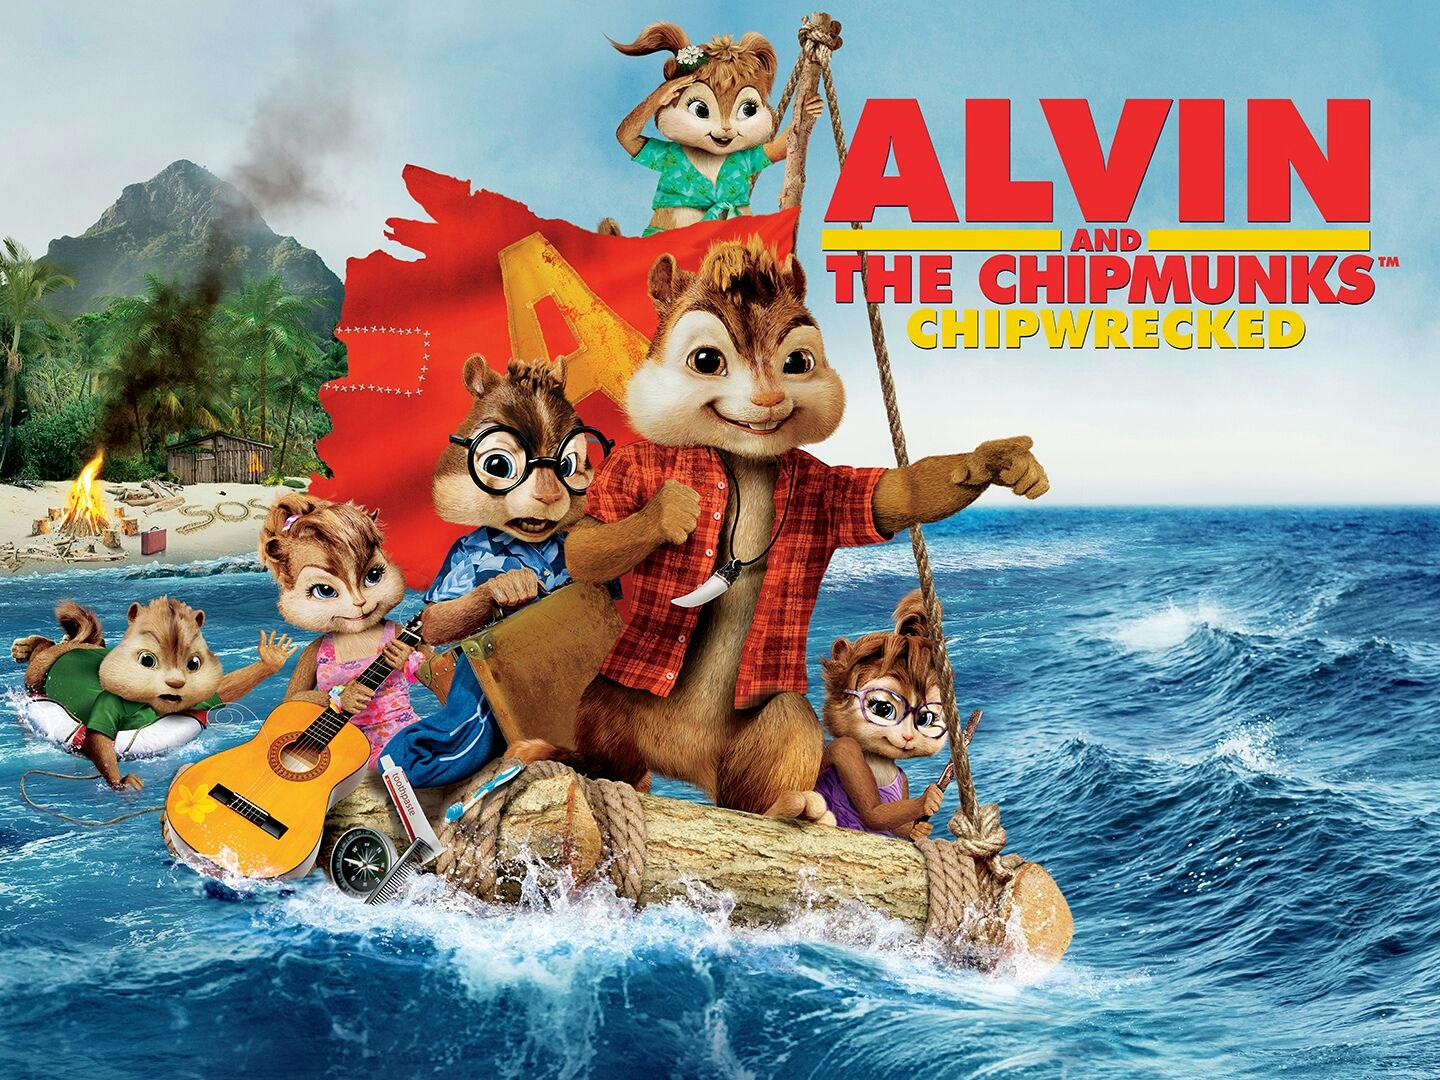 Alvin and the chipmunks chipwrecked balls